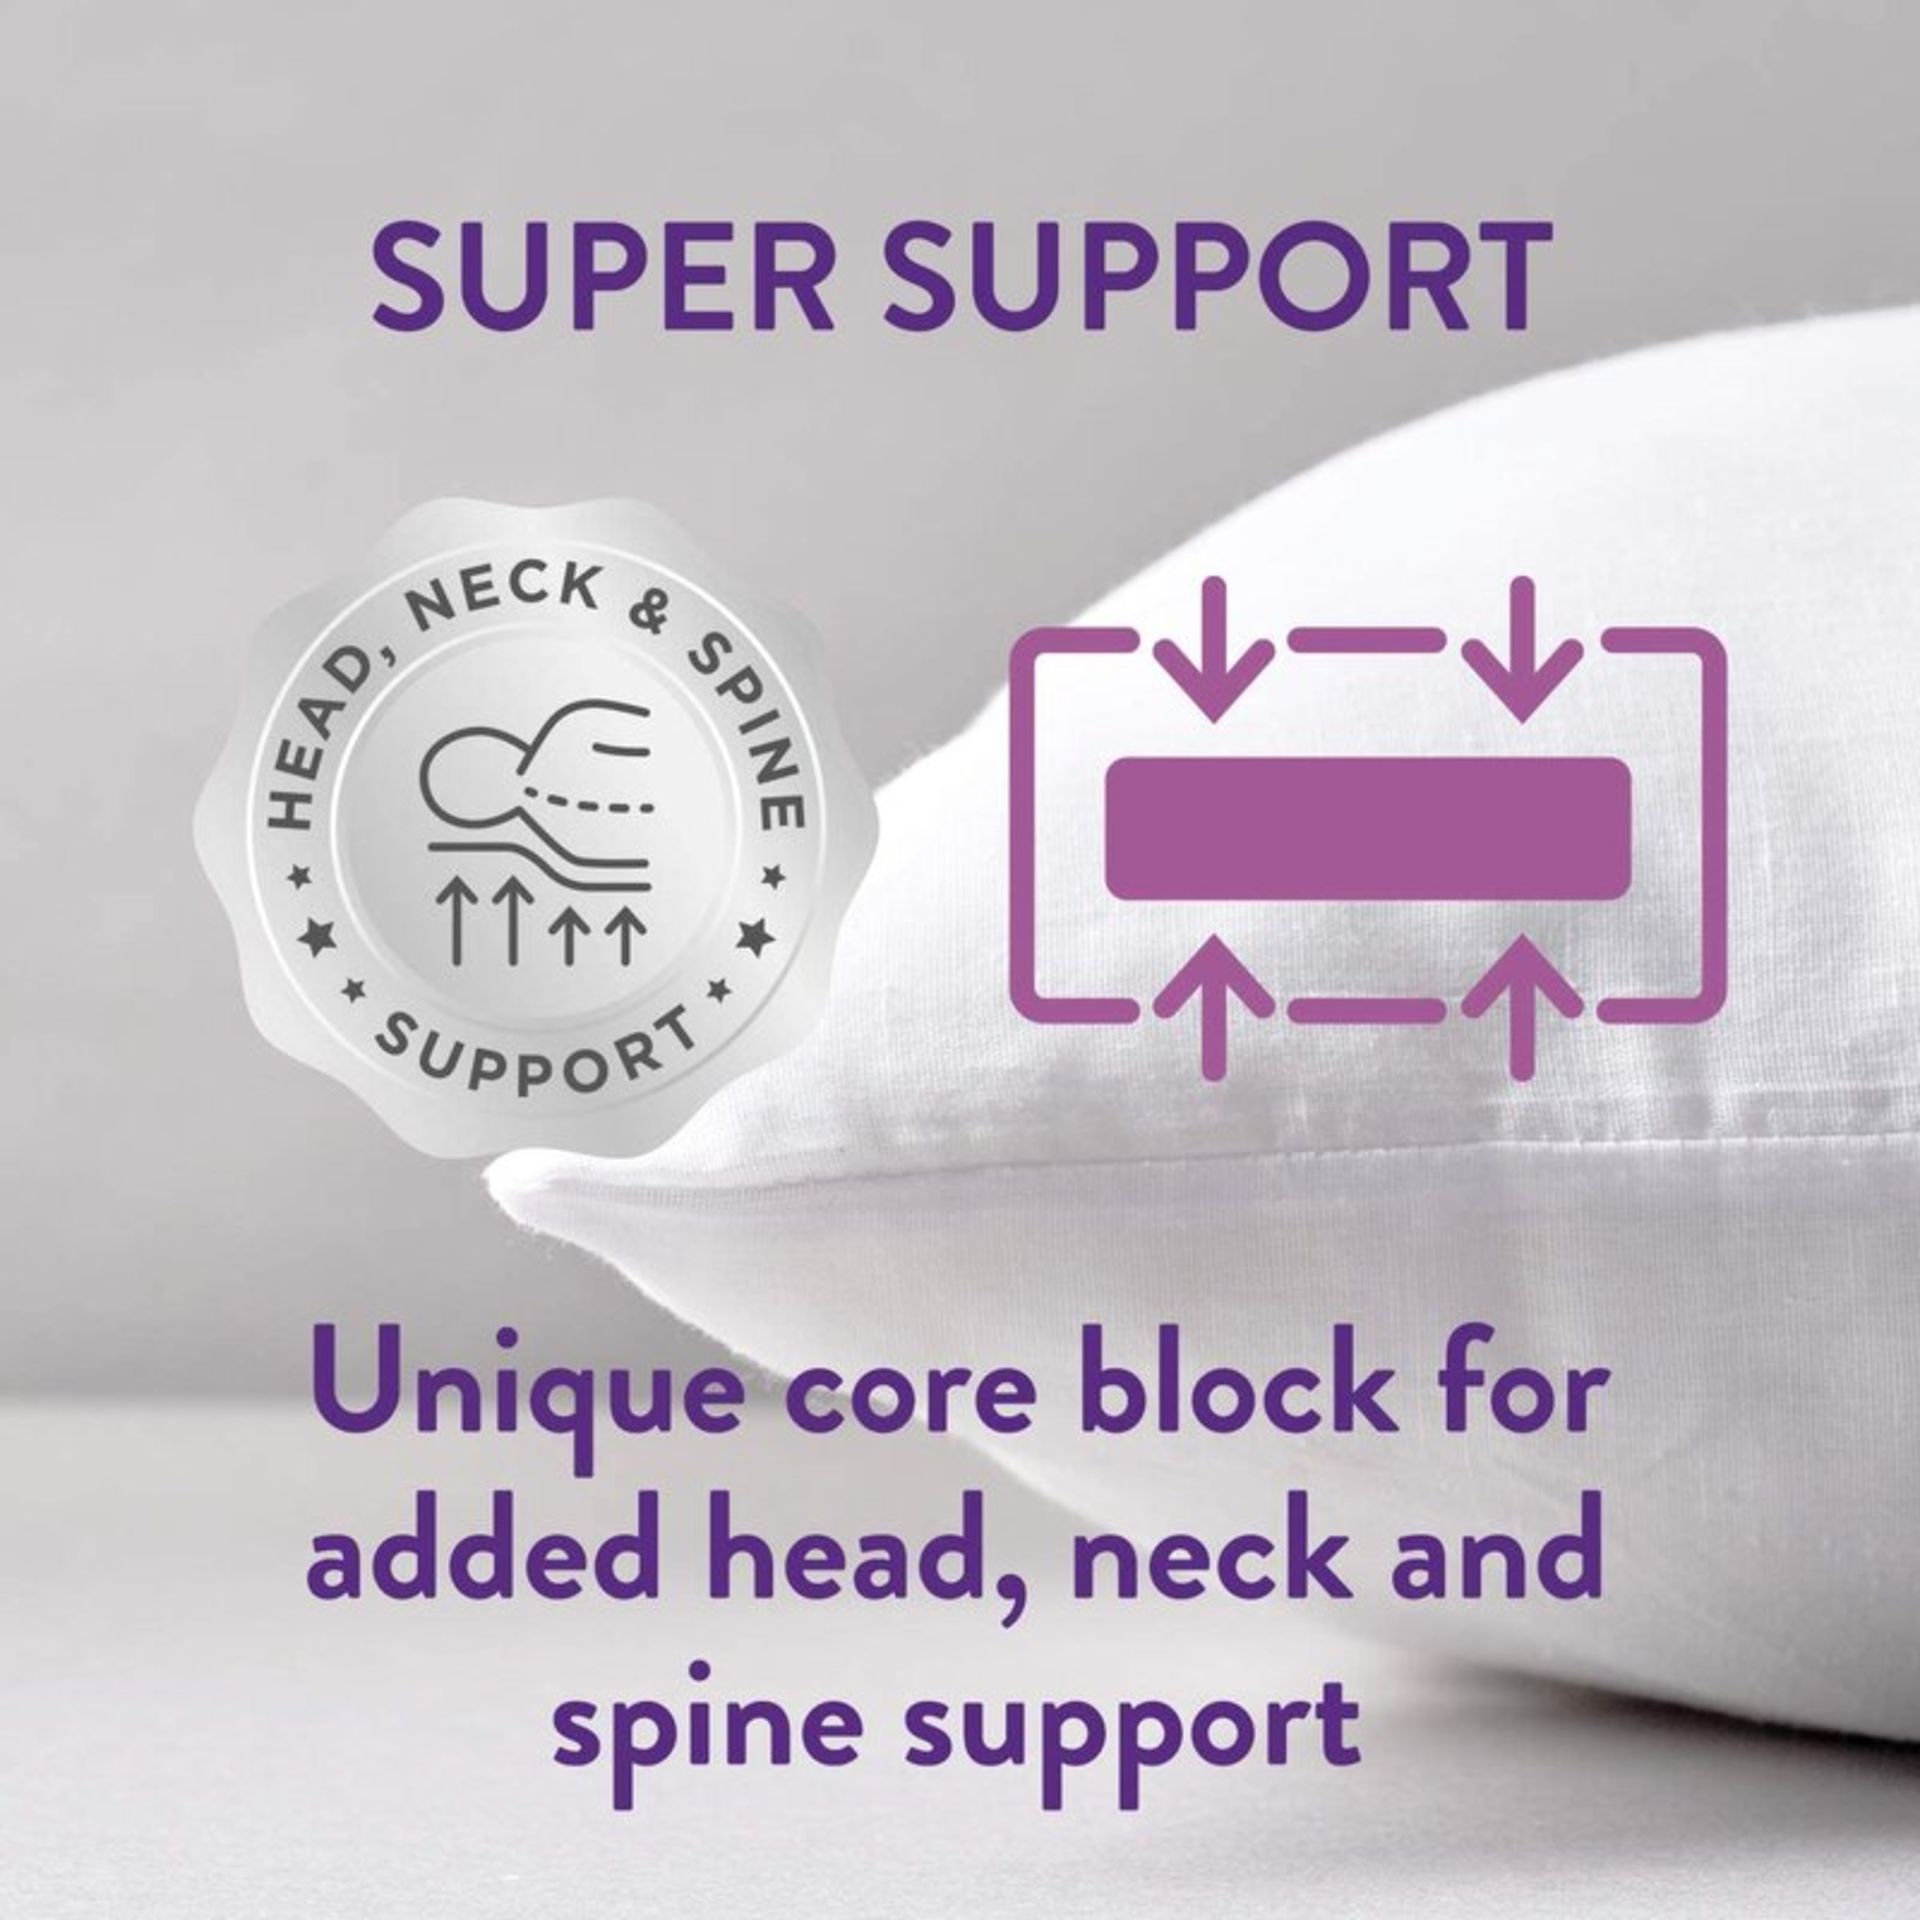 X4 Slumberdown Super Support Pillow - RRP £19.66. - Image 2 of 2